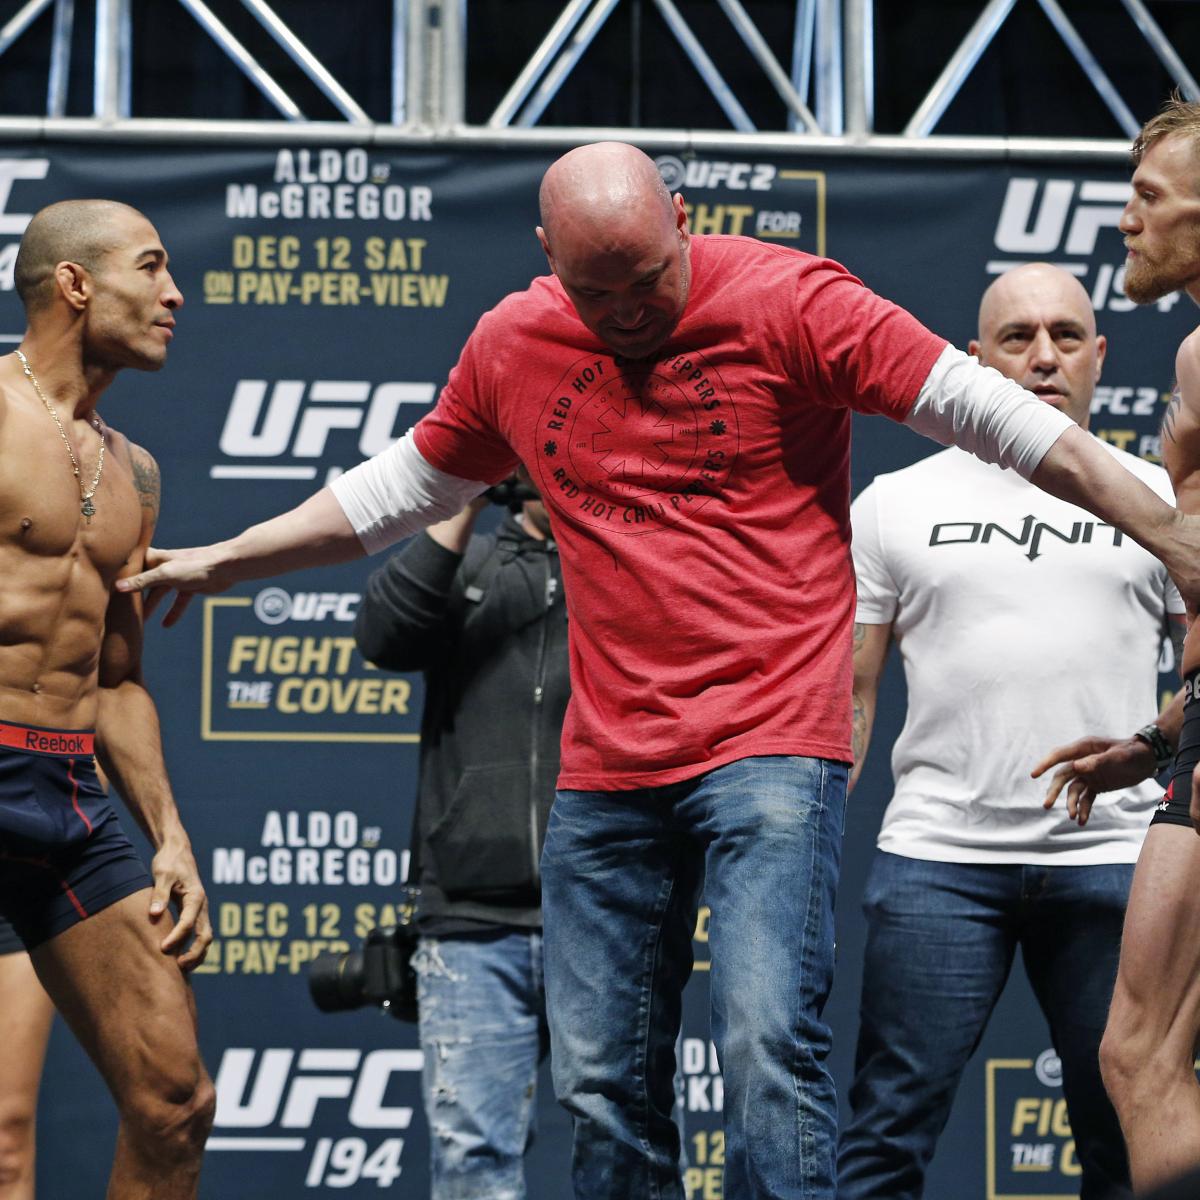 UFC 194 Aldo vs. McGregor: Live Results, Play-by-Play and Fight Card ...